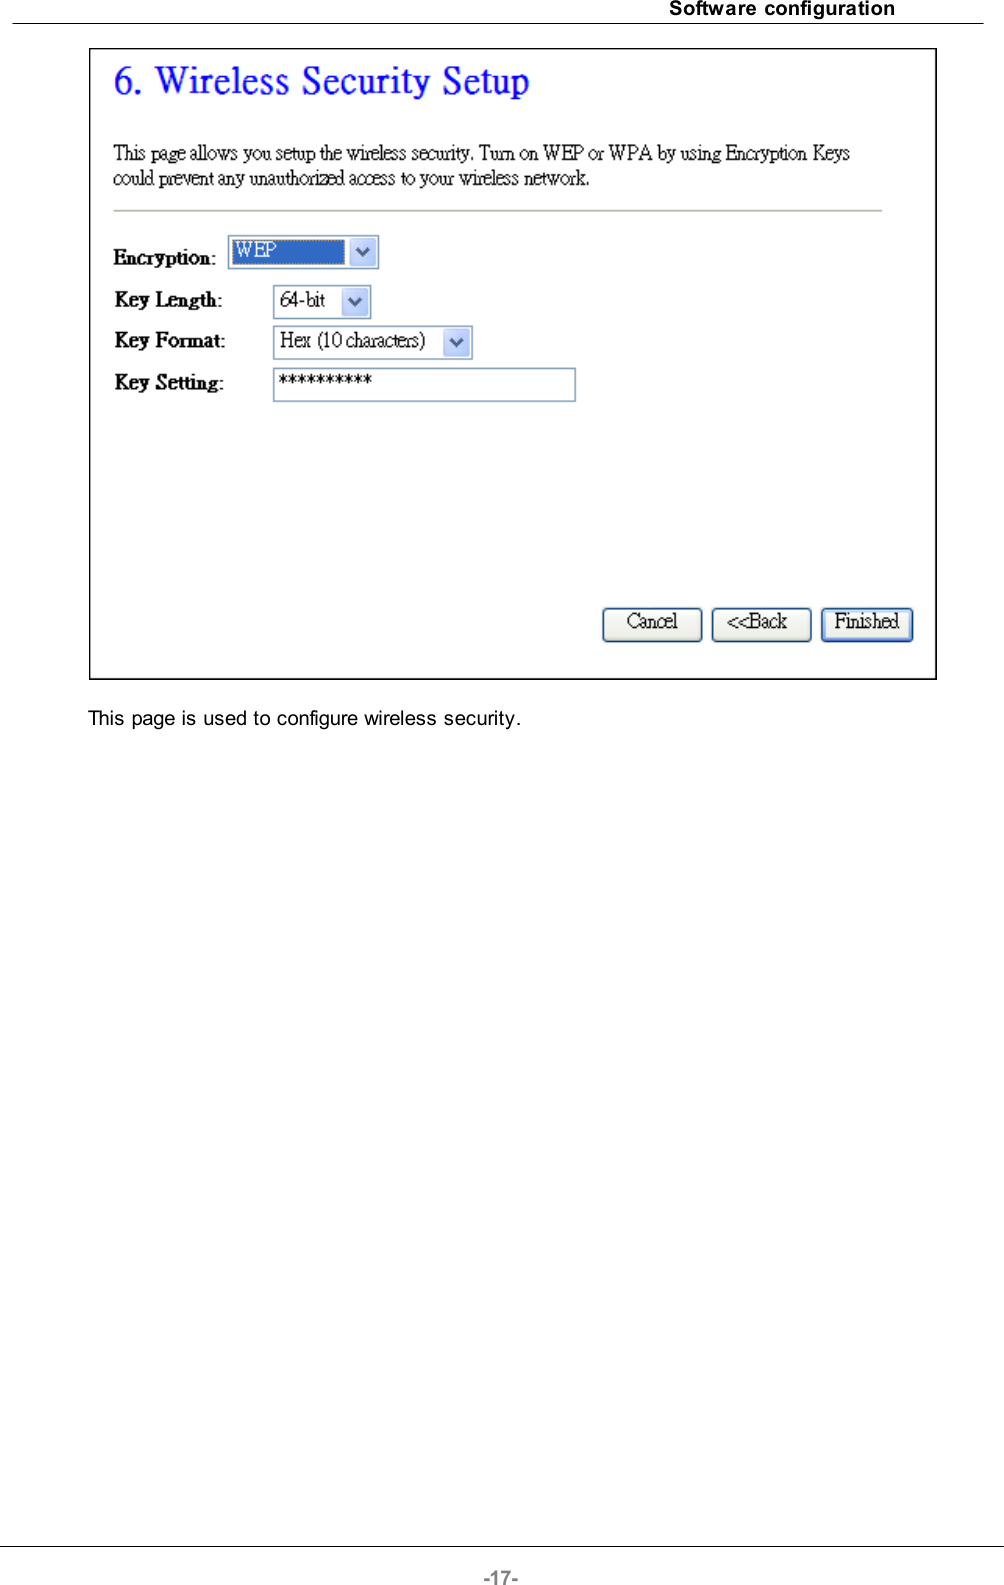 Software configuration-17-This page is used to configure wireless security.